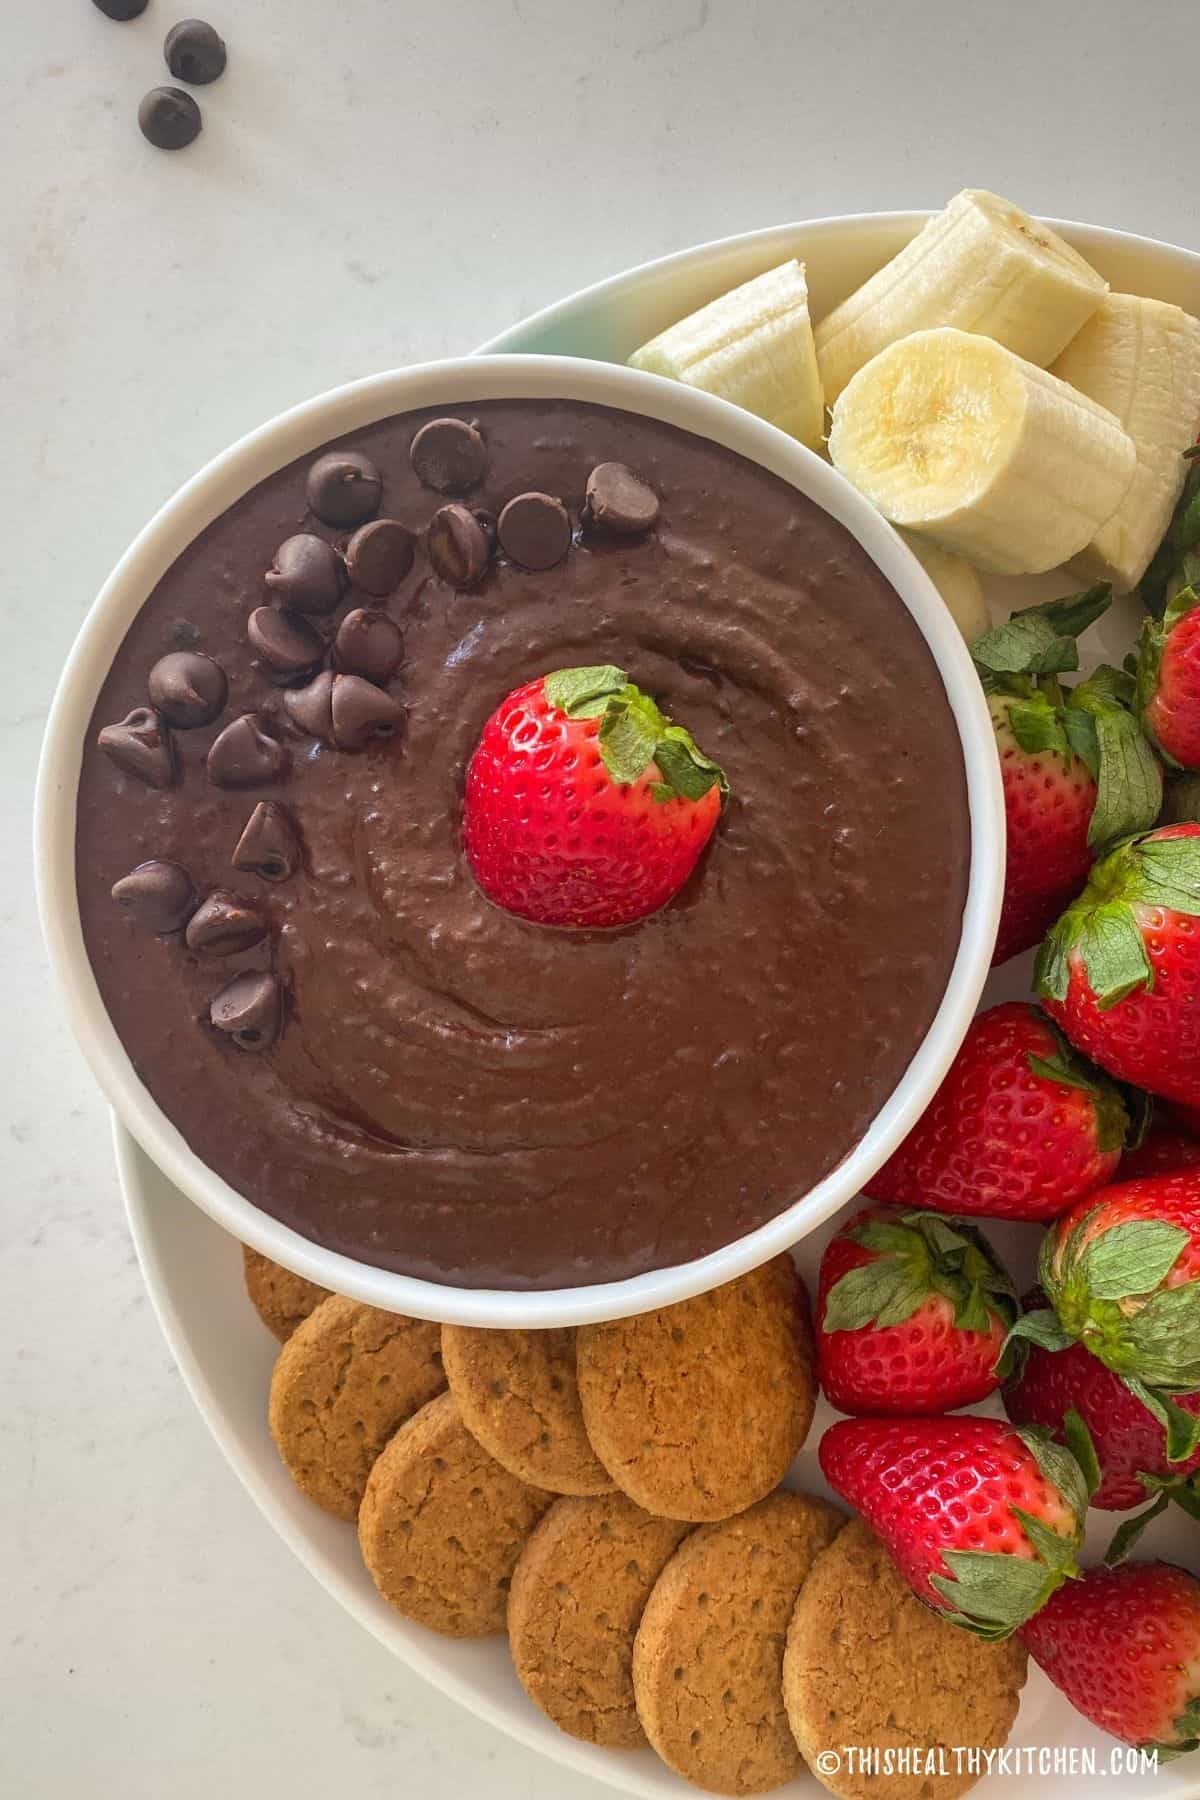 Bowl of chocolate hummus with a strawberry in the center and cookies and banana slices around it.